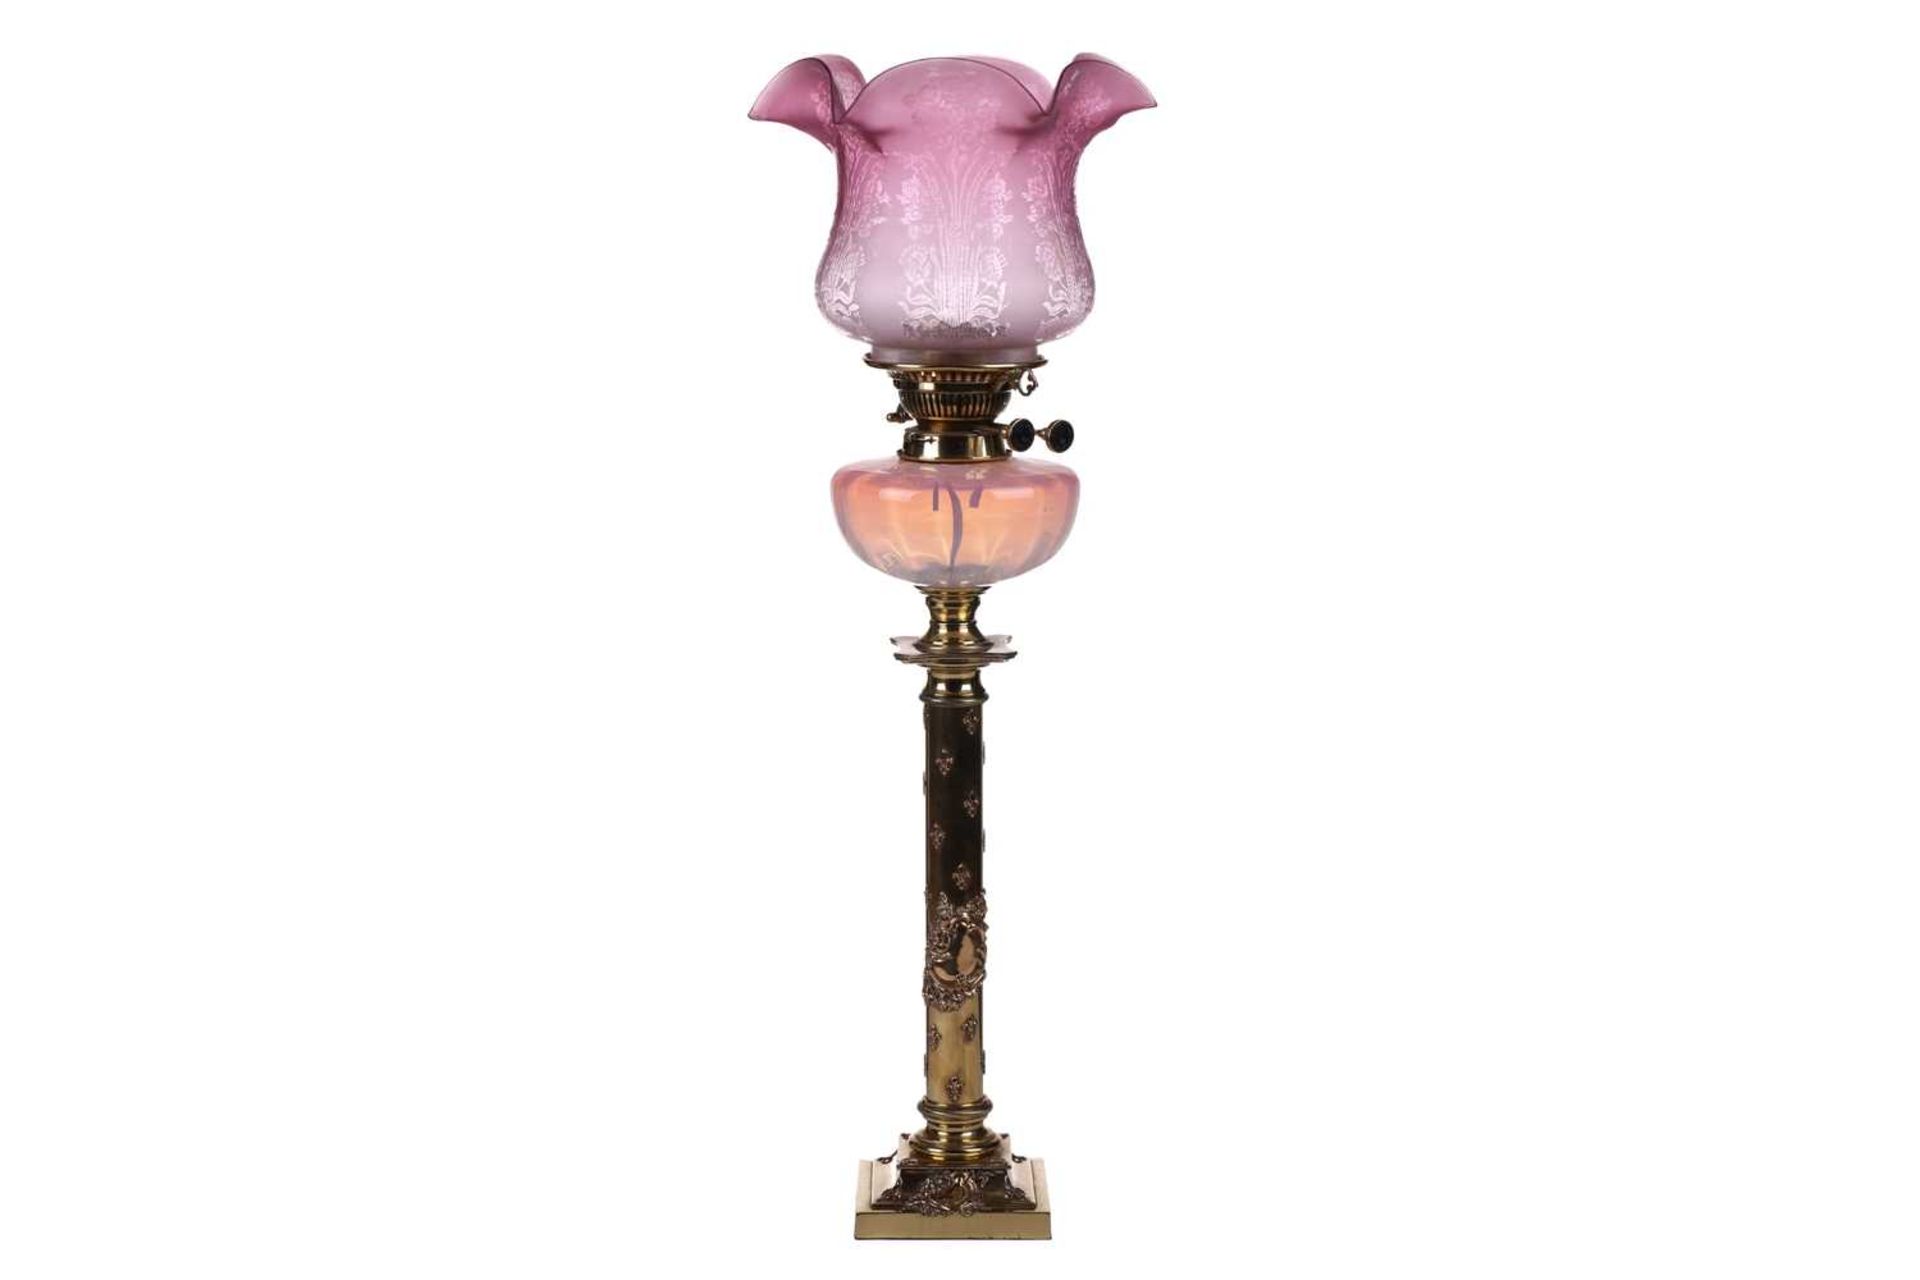 A Victorian brass oil lamp with vaseline and cranberry glass reservoir and diffuser (now fitted